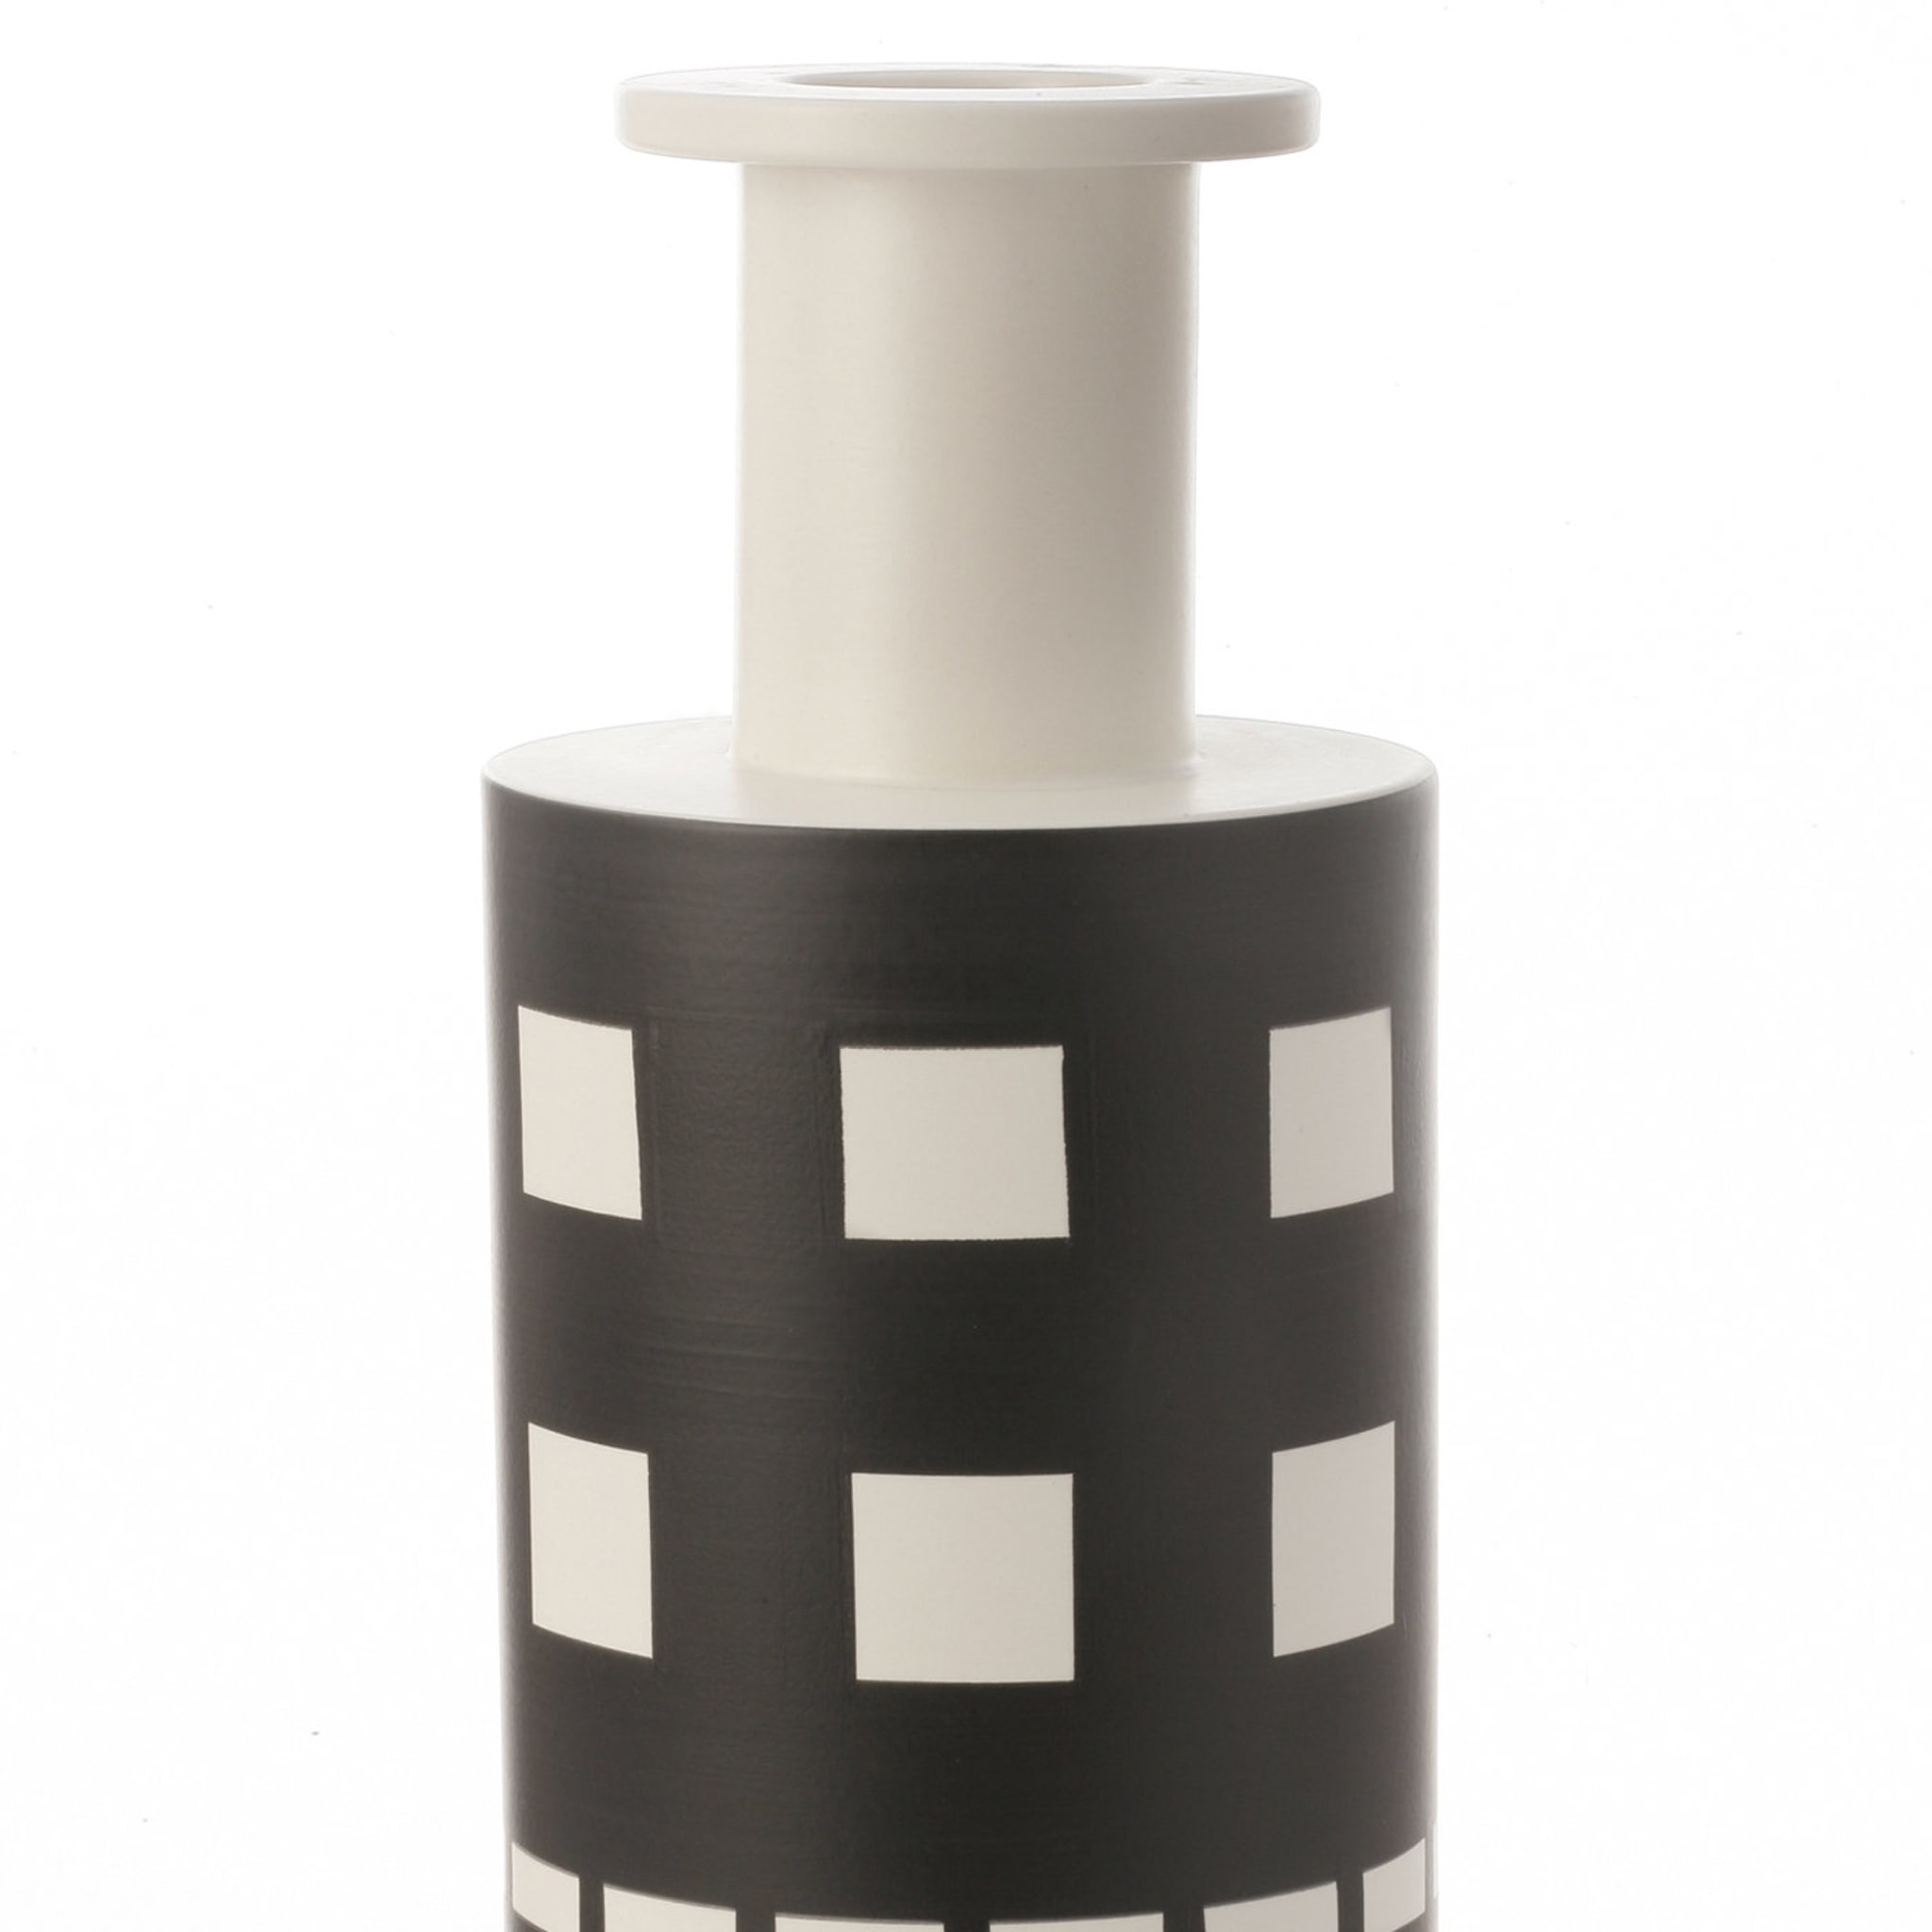 Black and White Reel Vase by Ettore Sottsass - Alternative view 1